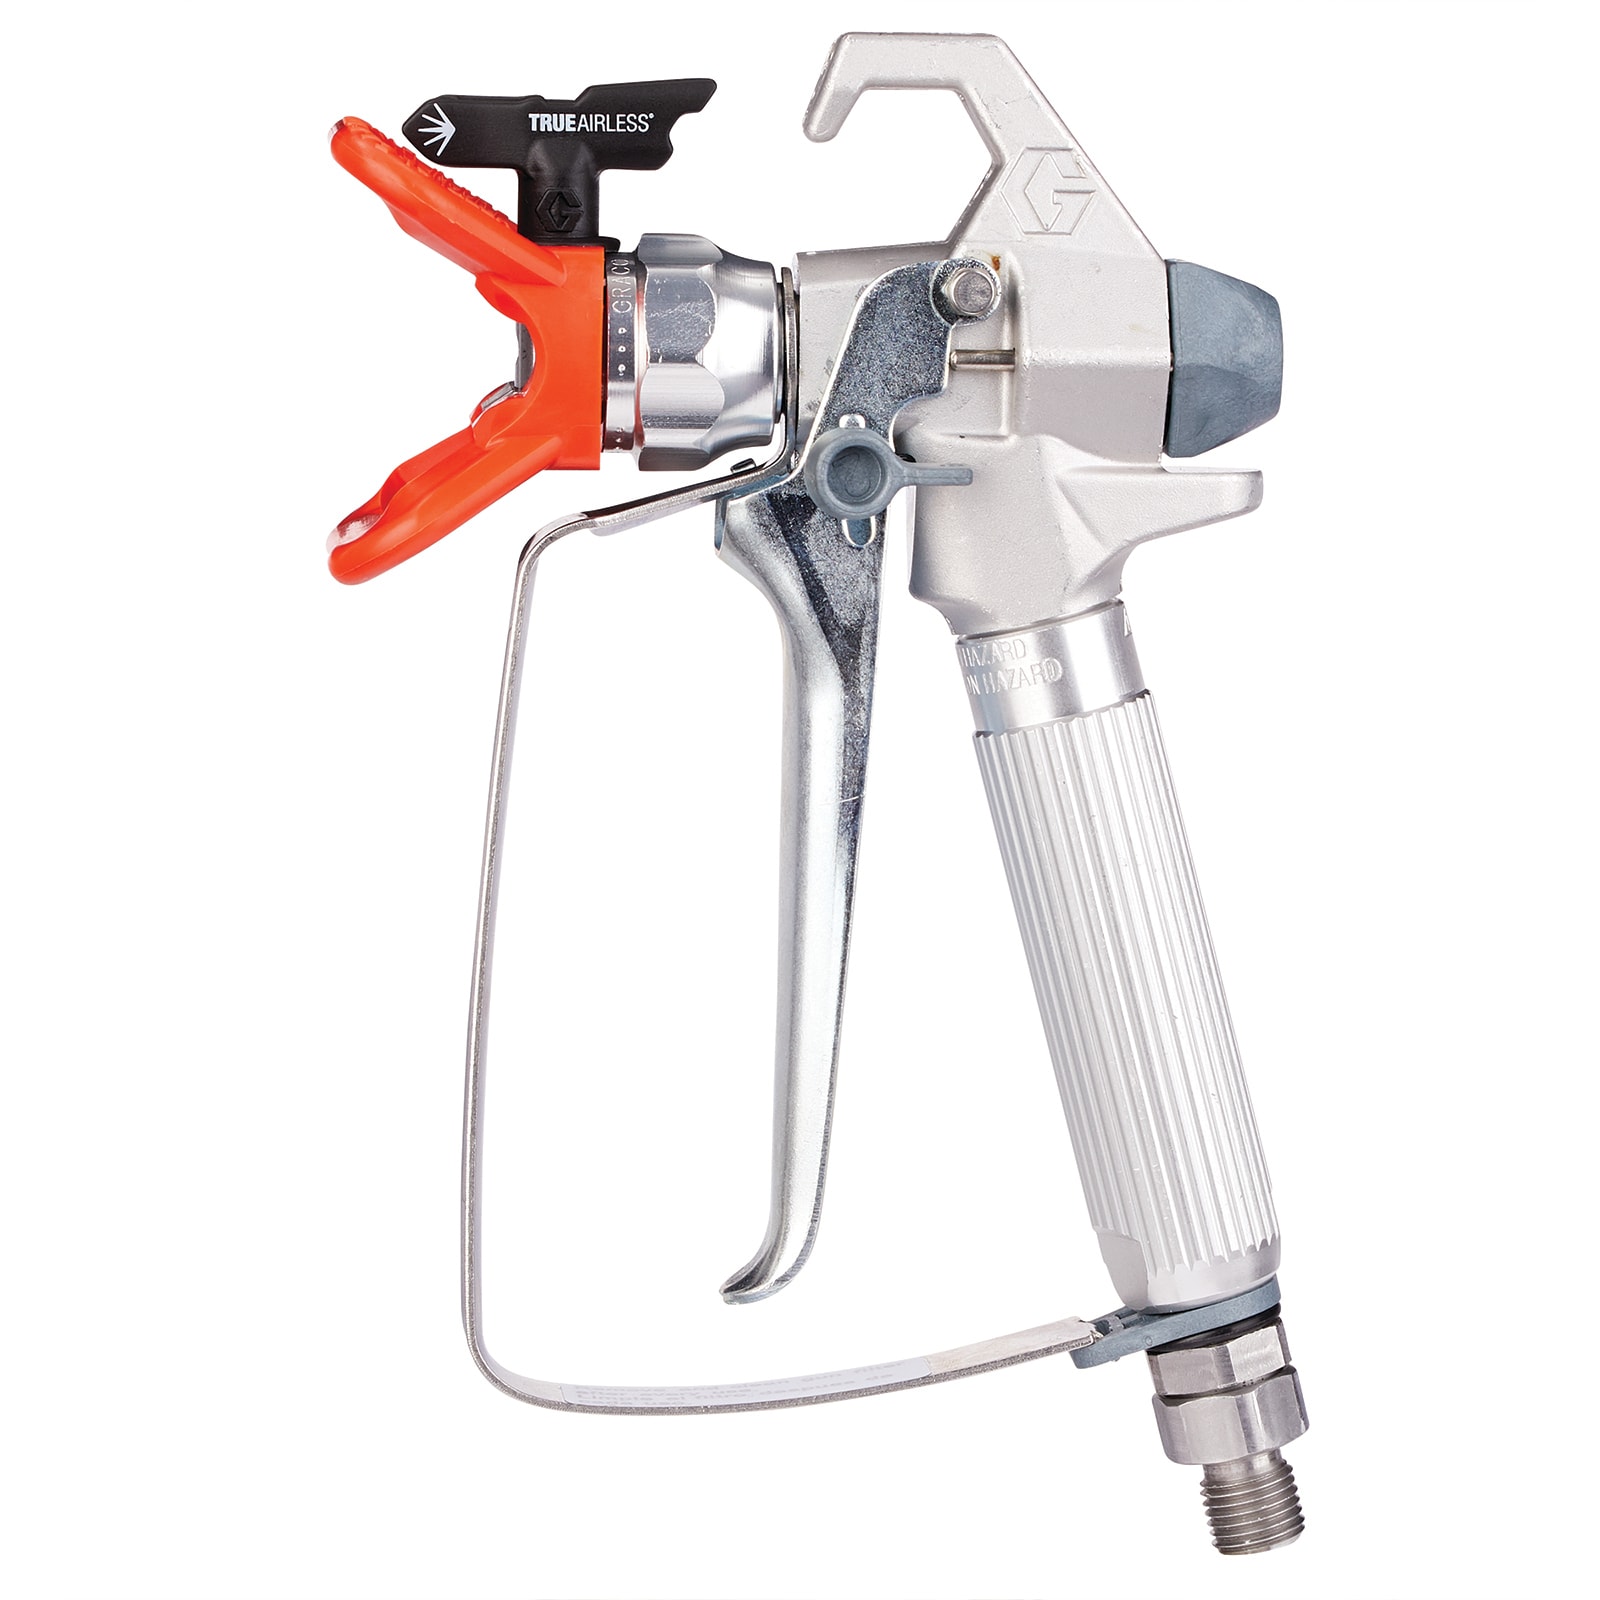 Graco Magnum SG3 Metal Spray Gun for Paint Sprayers - Adjustable Spray  Pattern, 4-Finger Trigger, Built-In Hose Swivel, 60-Mesh Filter in the Paint  Sprayer Parts & Accessories department at